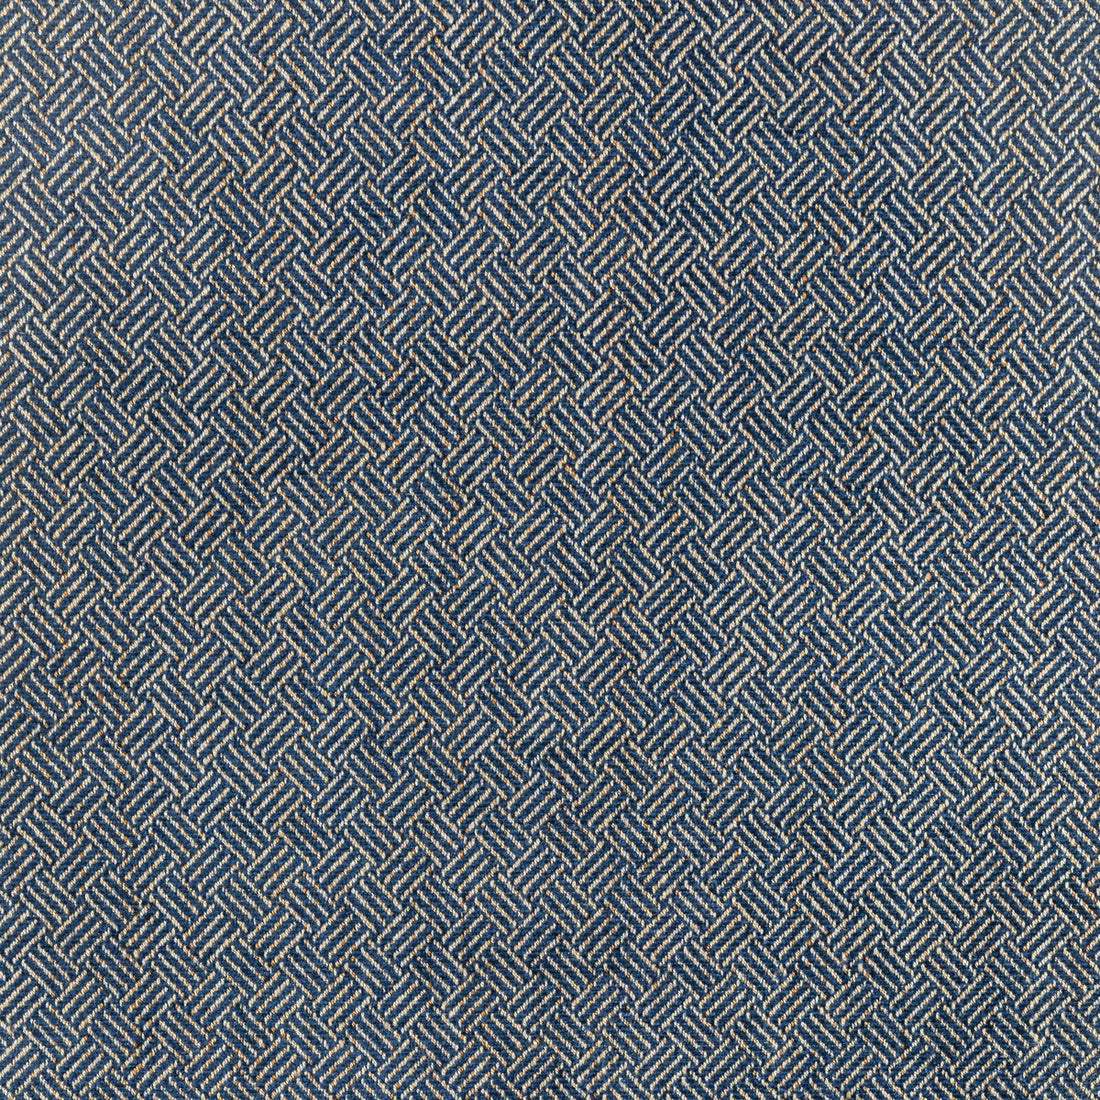 Leon Weave fabric in navy color - pattern 2021109.50.0 - by Lee Jofa in the Triana Weaves collection